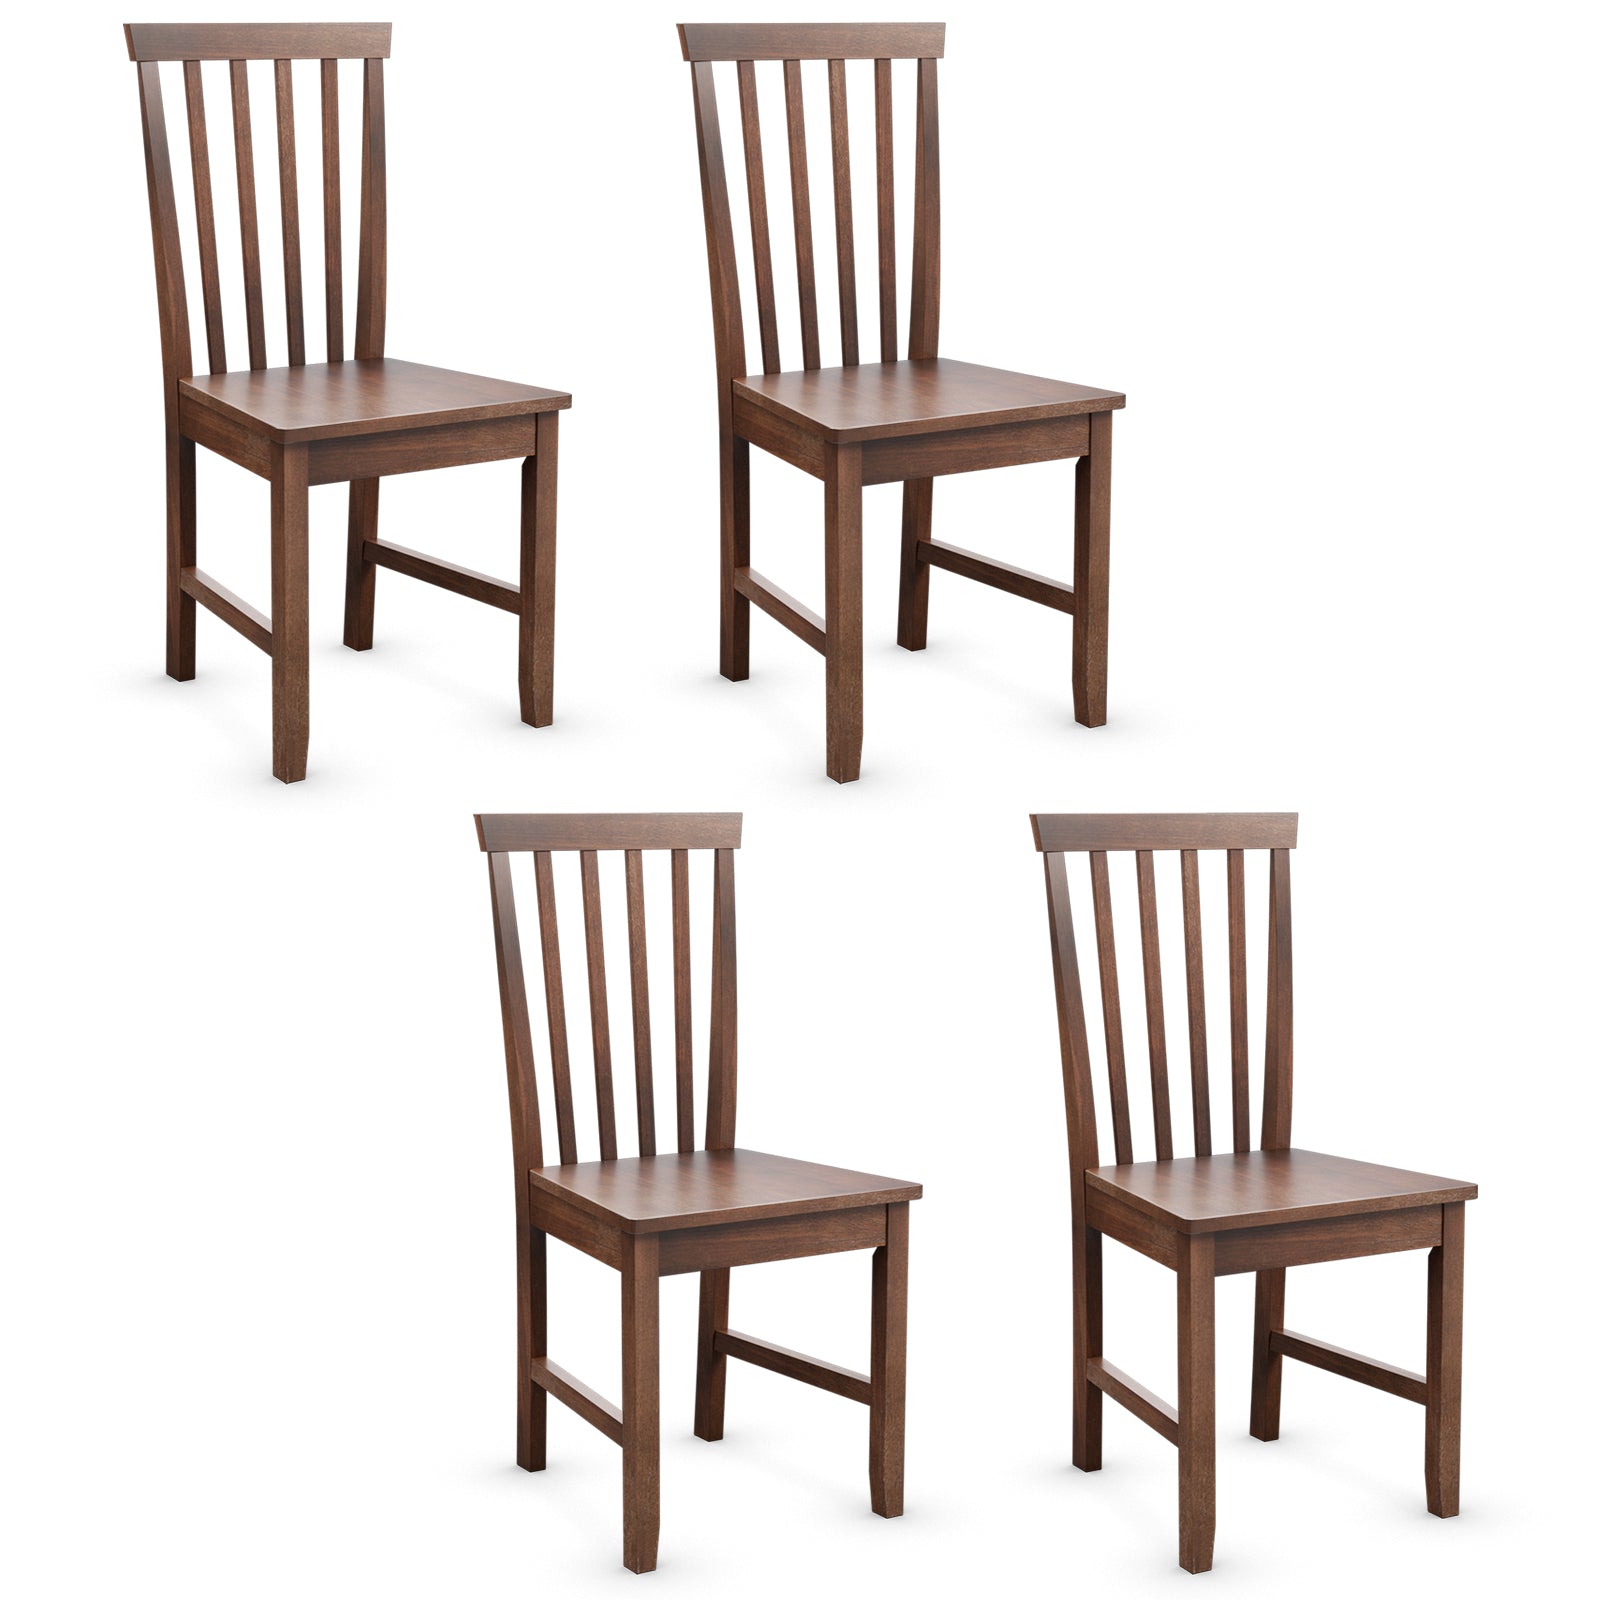 Set of 4 Dining Room Side Chair - Giantex